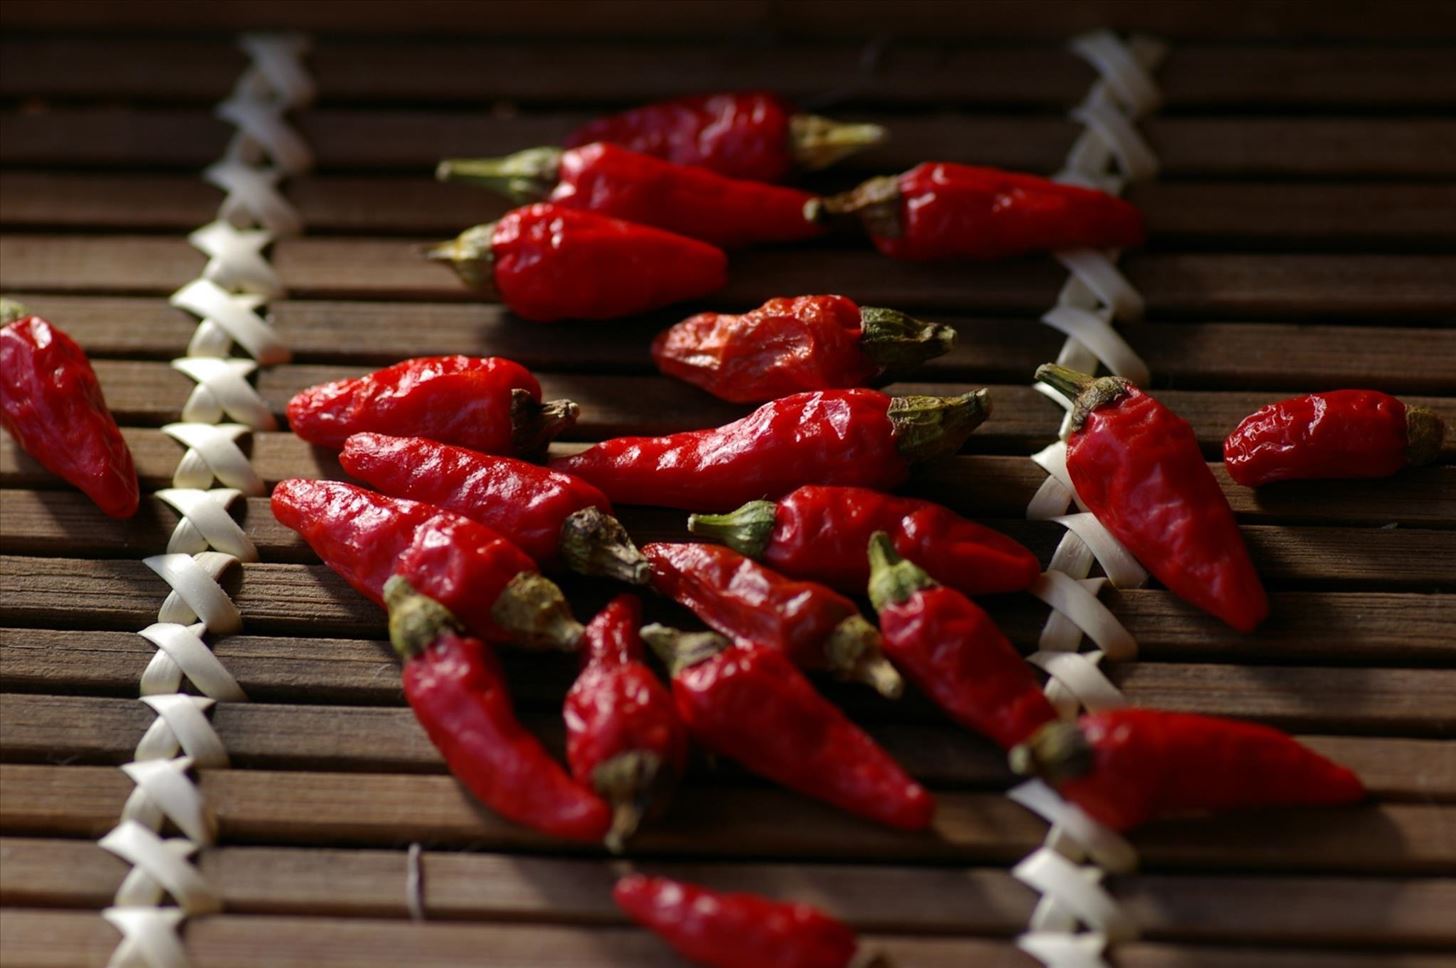 Ingredients 101: The Know-It-All Guide to Peppers